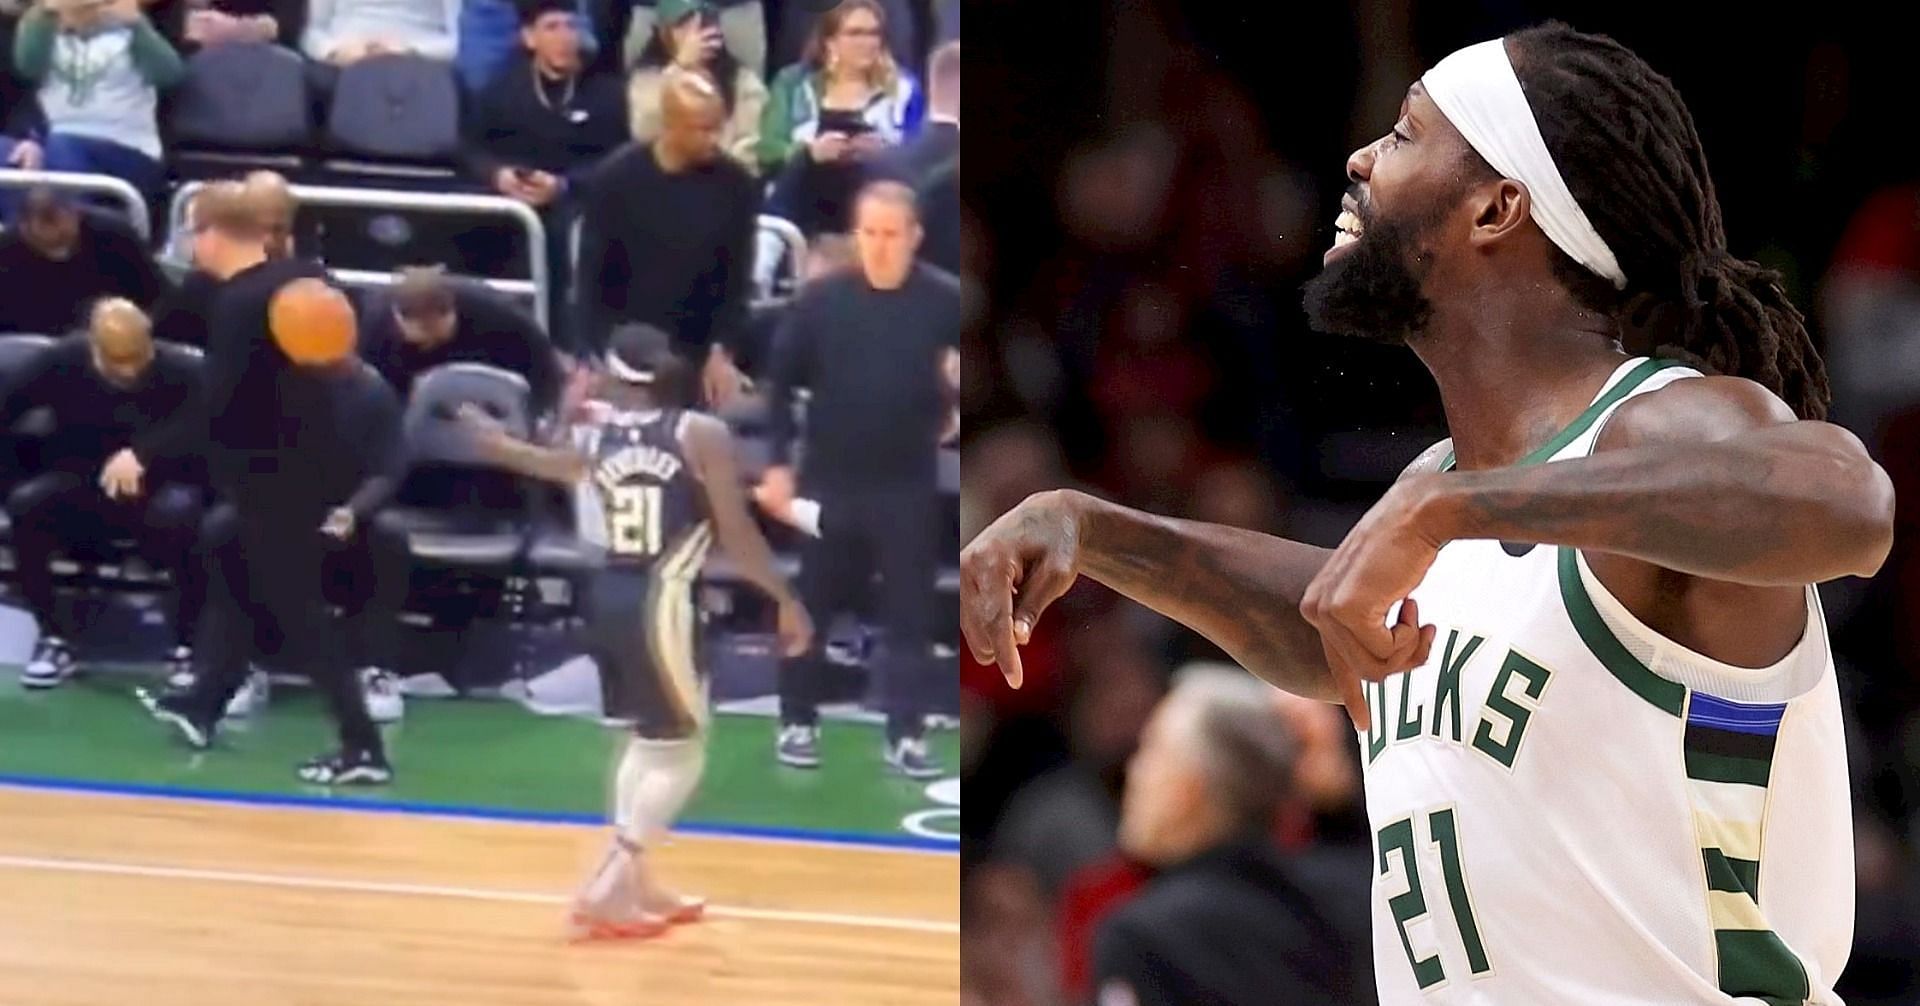 WATCH: Patrick Beverley tosses ball at ex-coach Nick Nurse after sweeping Sixers 2-0 since trad